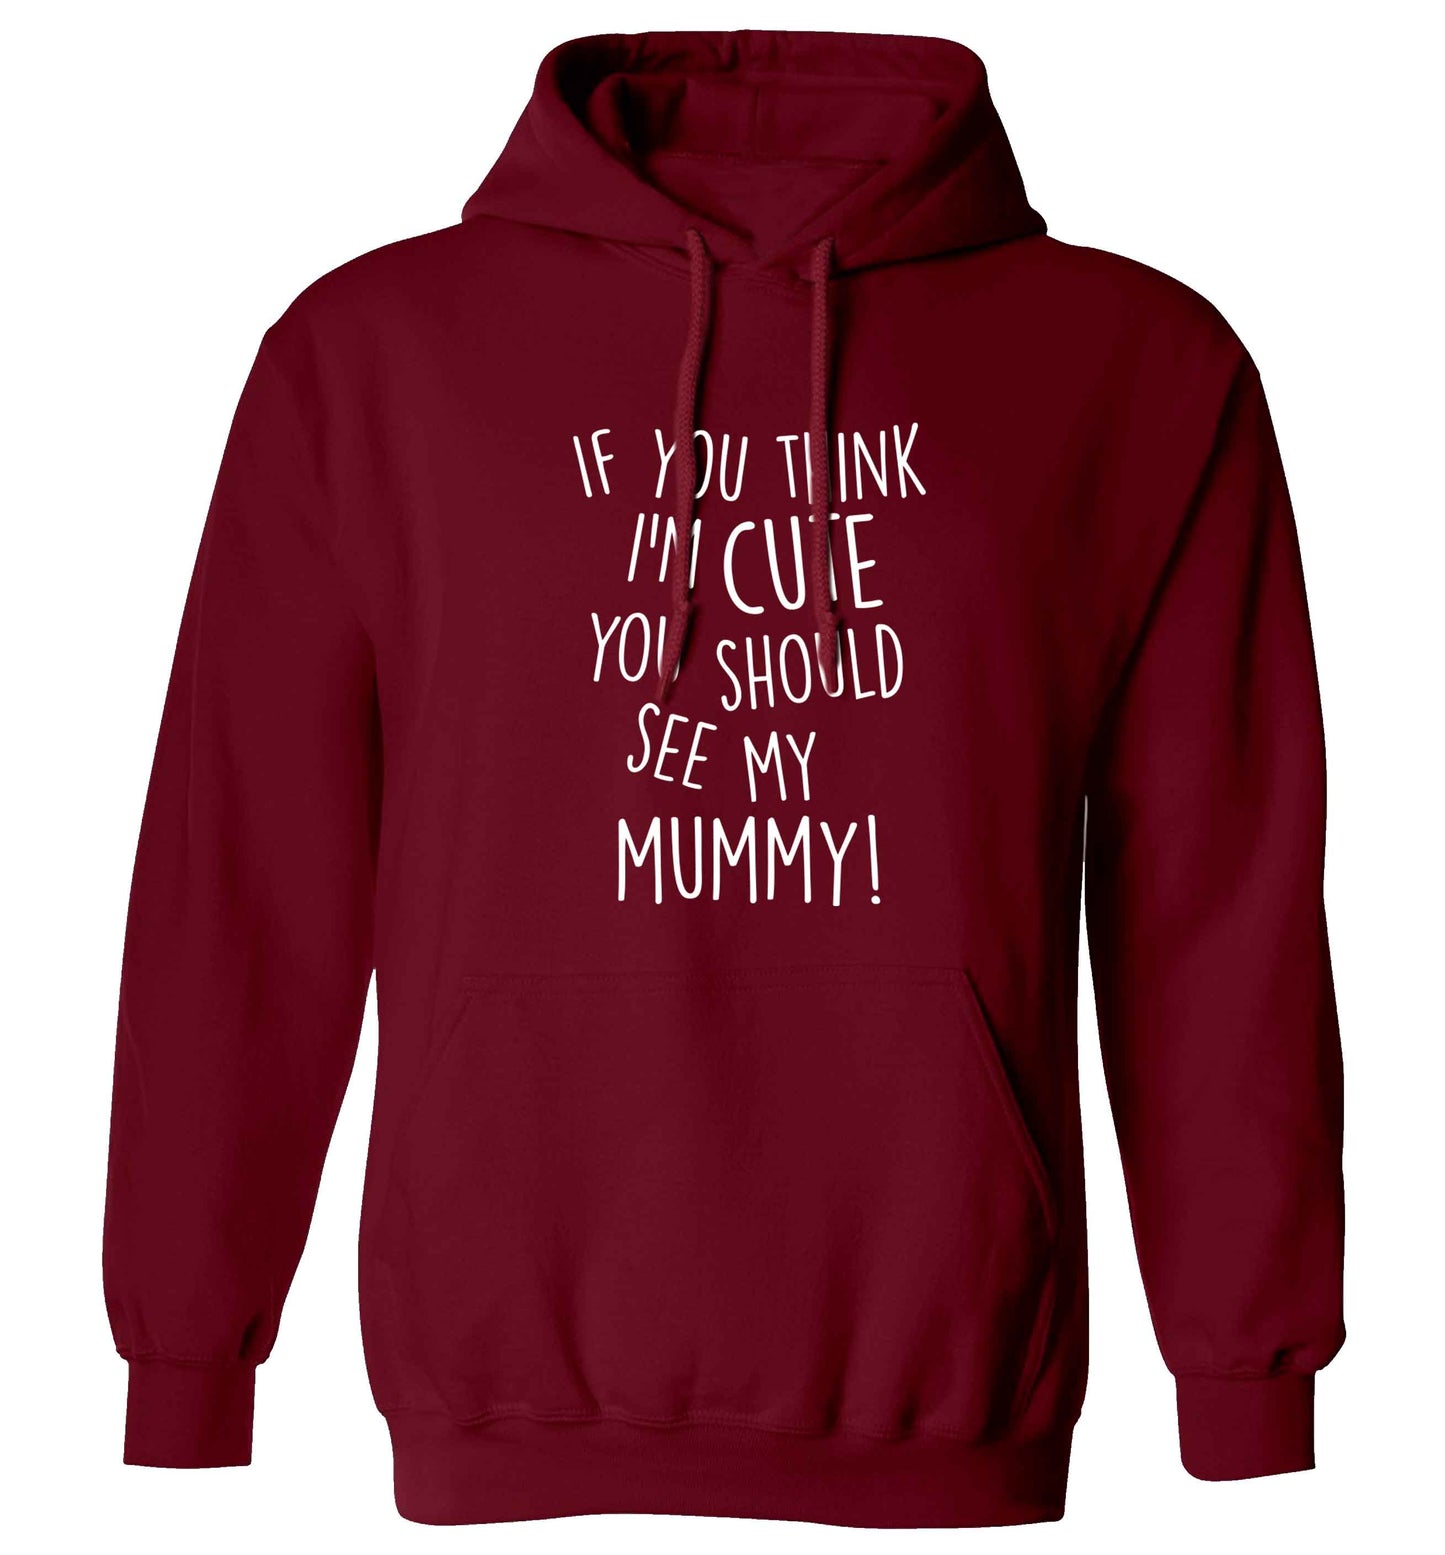 If you think I'm cute you should see my mummy adults unisex maroon hoodie 2XL